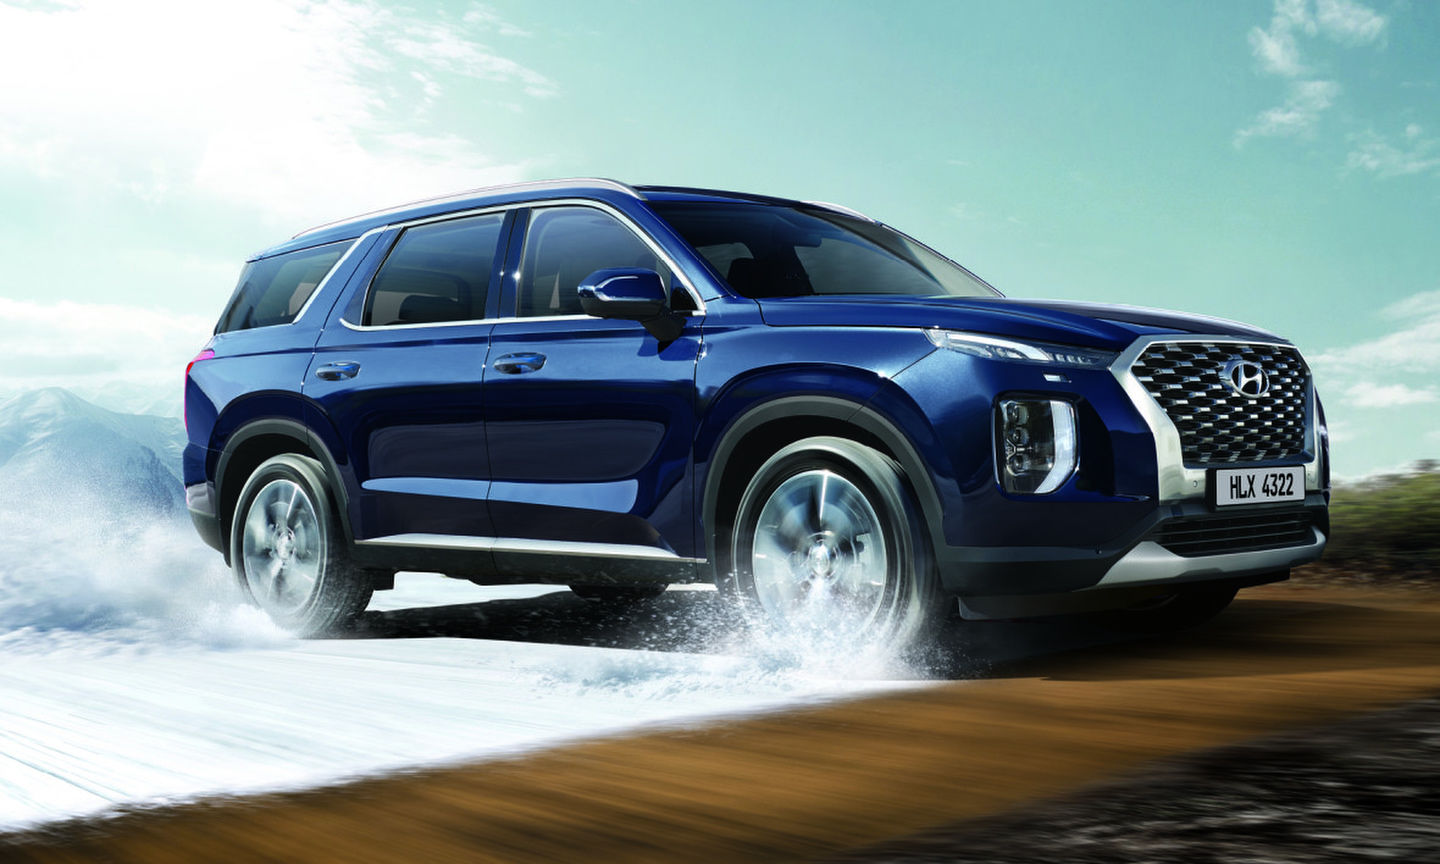 Hyundai Features Tailor-Made for Winter